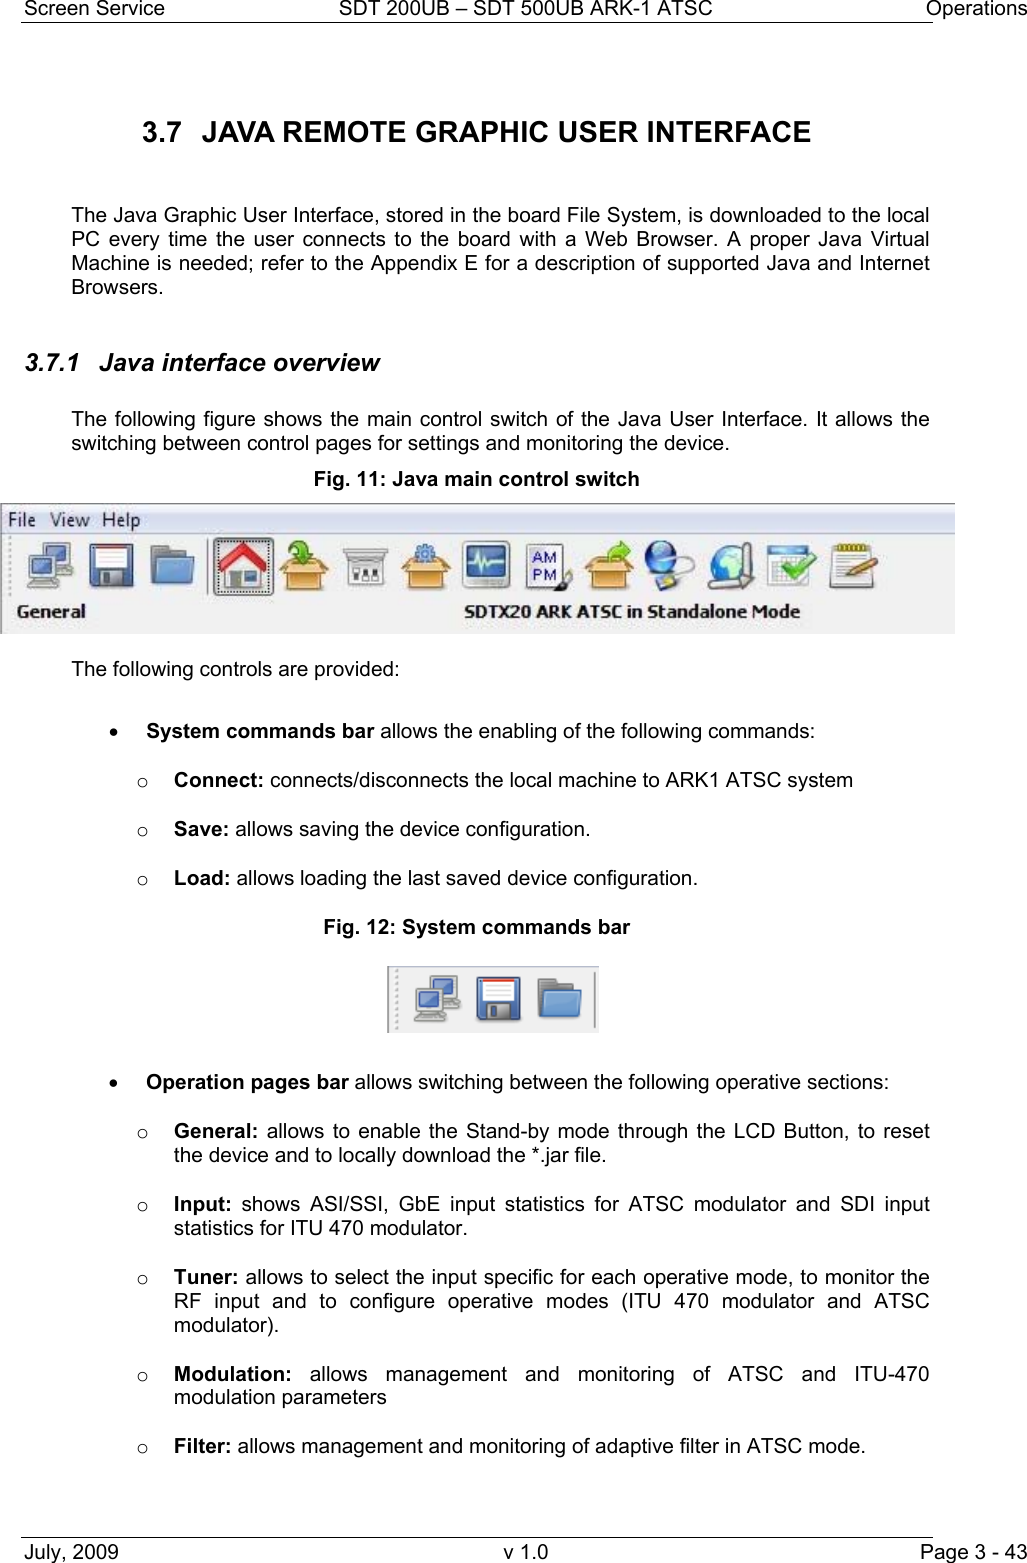 Screen Service  SDT 200UB – SDT 500UB ARK-1 ATSC  Operations July, 2009  v 1.0  Page 3 - 43 3.7  JAVA REMOTE GRAPHIC USER INTERFACE   The Java Graphic User Interface, stored in the board File System, is downloaded to the local PC every time the user connects to the board with a Web Browser. A proper Java Virtual Machine is needed; refer to the Appendix E for a description of supported Java and Internet Browsers.  3.7.1  Java interface overview  The following figure shows the main control switch of the Java User Interface. It allows the switching between control pages for settings and monitoring the device. Fig. 11: Java main control switch  The following controls are provided:  • System commands bar allows the enabling of the following commands: o Connect: connects/disconnects the local machine to ARK1 ATSC system o Save: allows saving the device configuration. o Load: allows loading the last saved device configuration. Fig. 12: System commands bar  • Operation pages bar allows switching between the following operative sections: o General: allows to enable the Stand-by mode through the LCD Button, to reset the device and to locally download the *.jar file. o Input: shows ASI/SSI, GbE input statistics for ATSC modulator and SDI input statistics for ITU 470 modulator. o Tuner: allows to select the input specific for each operative mode, to monitor the RF input and to configure operative modes (ITU 470 modulator and ATSC modulator). o Modulation:  allows management and monitoring of ATSC and ITU-470 modulation parameters o Filter: allows management and monitoring of adaptive filter in ATSC mode. 